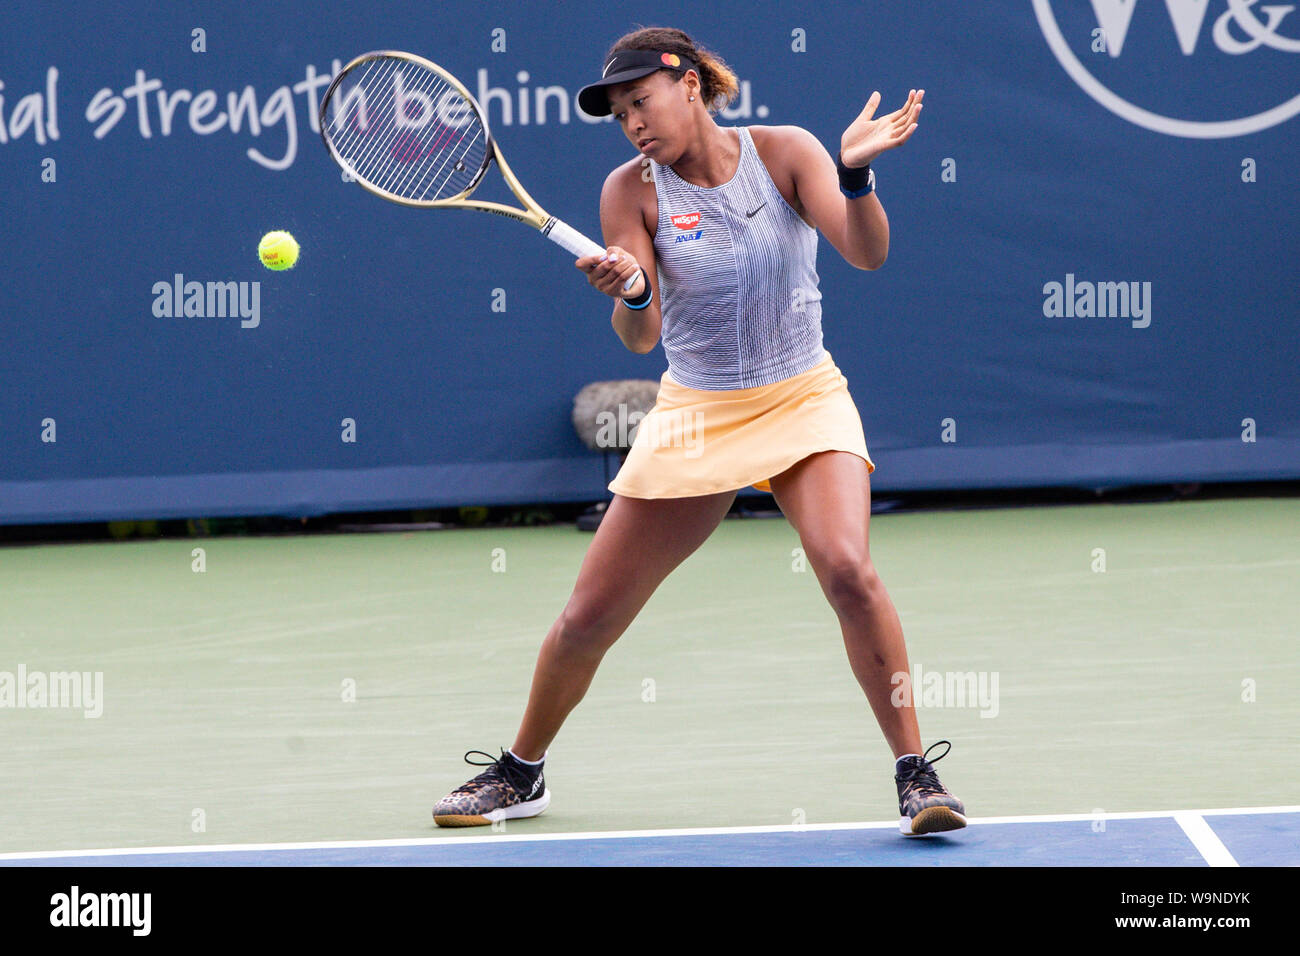 Mason, Ohio, USA. 14th Aug, 2019. Naomi Osaka (JPN) hits a forehand shot  during Wednesday's round of the Western and Southern Open at the Lindner  Family Tennis Center, Mason, Oh. Credit: Scott